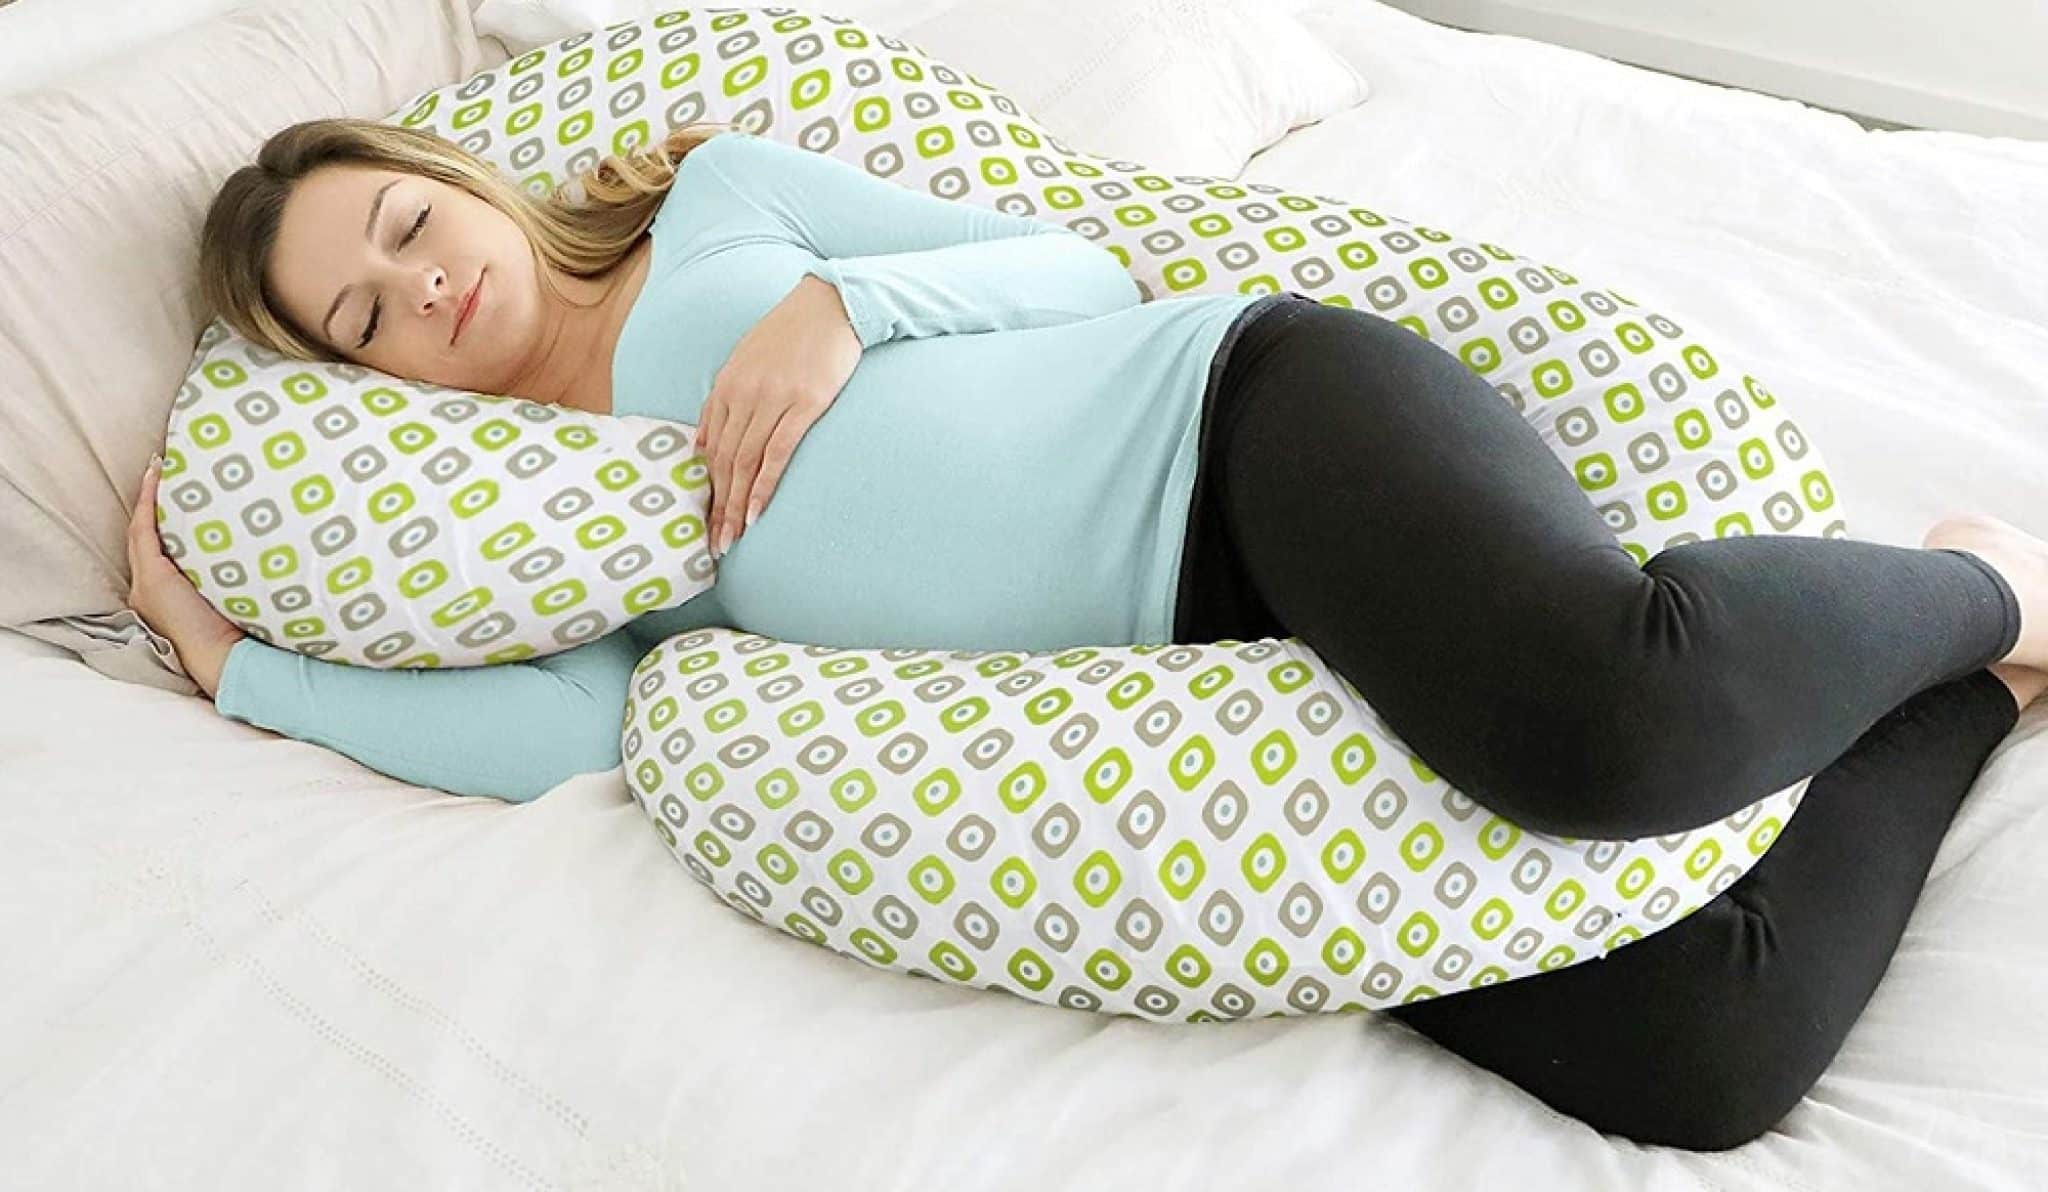 6 Best Pregnancy Pillow in 2022 Help You Sleep More Comfortably